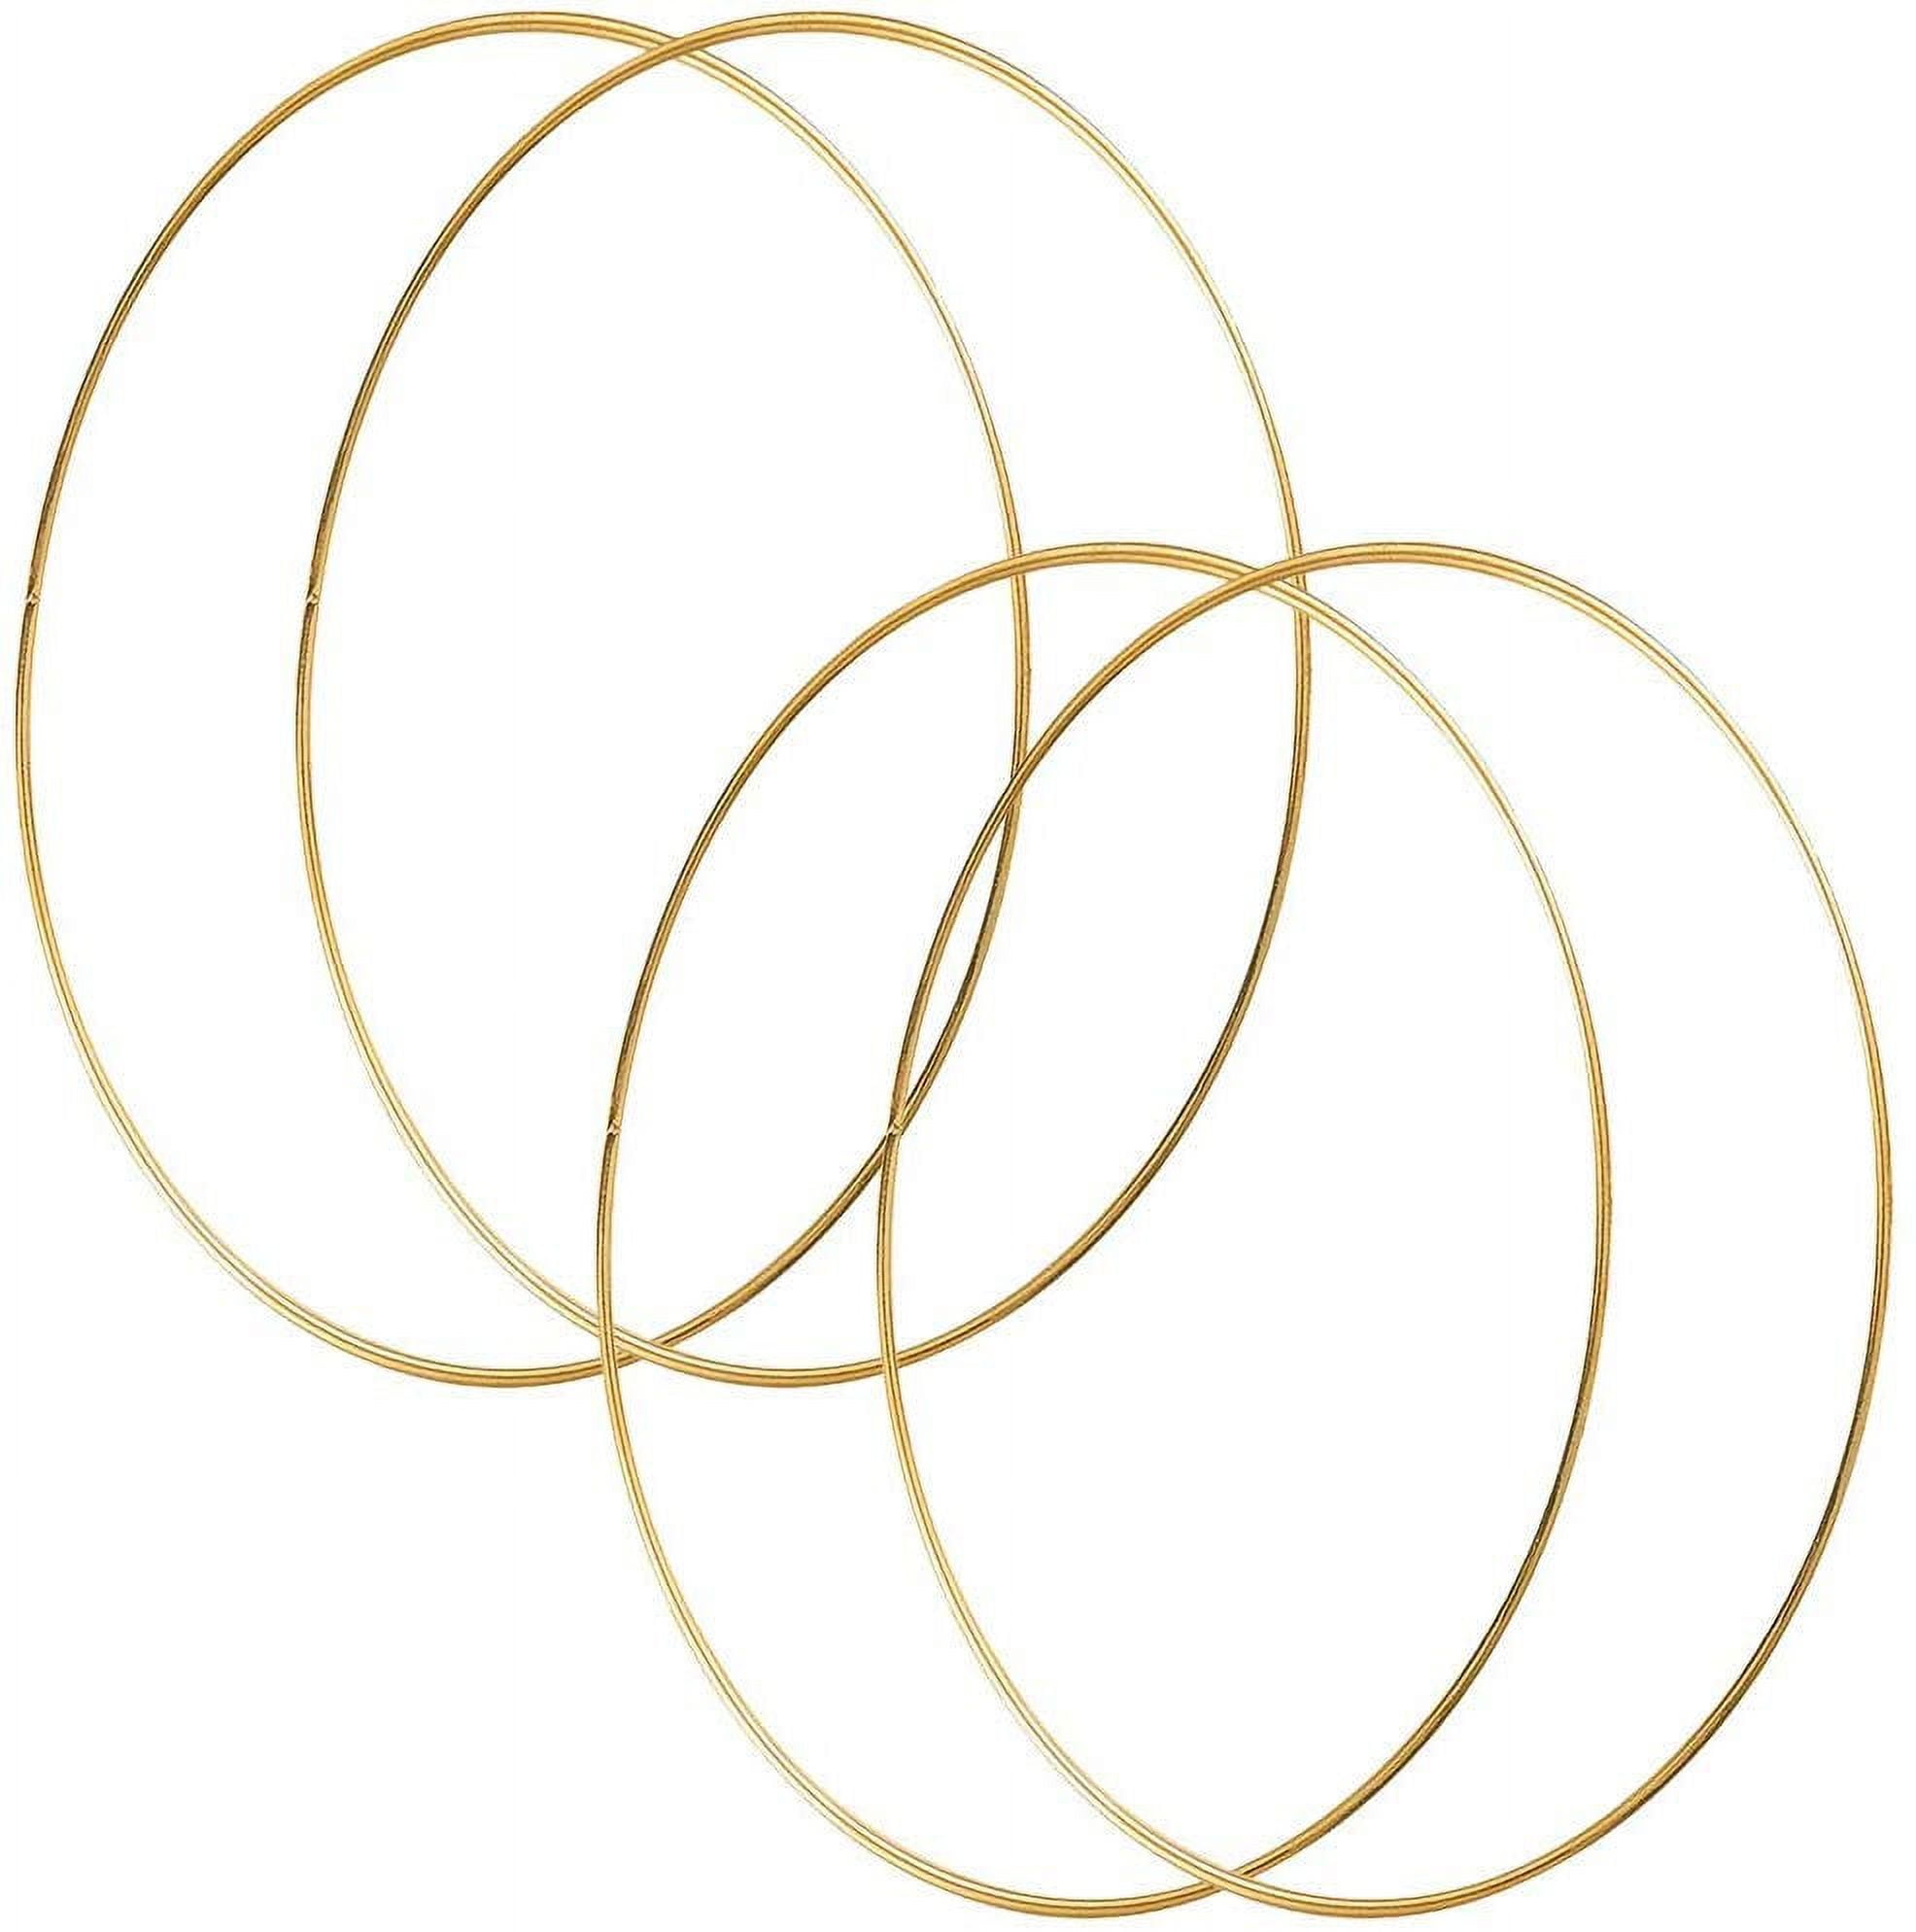 Round Flower Girl Hoops, Metal Circles Rings for Crafts Set of 2 Gold